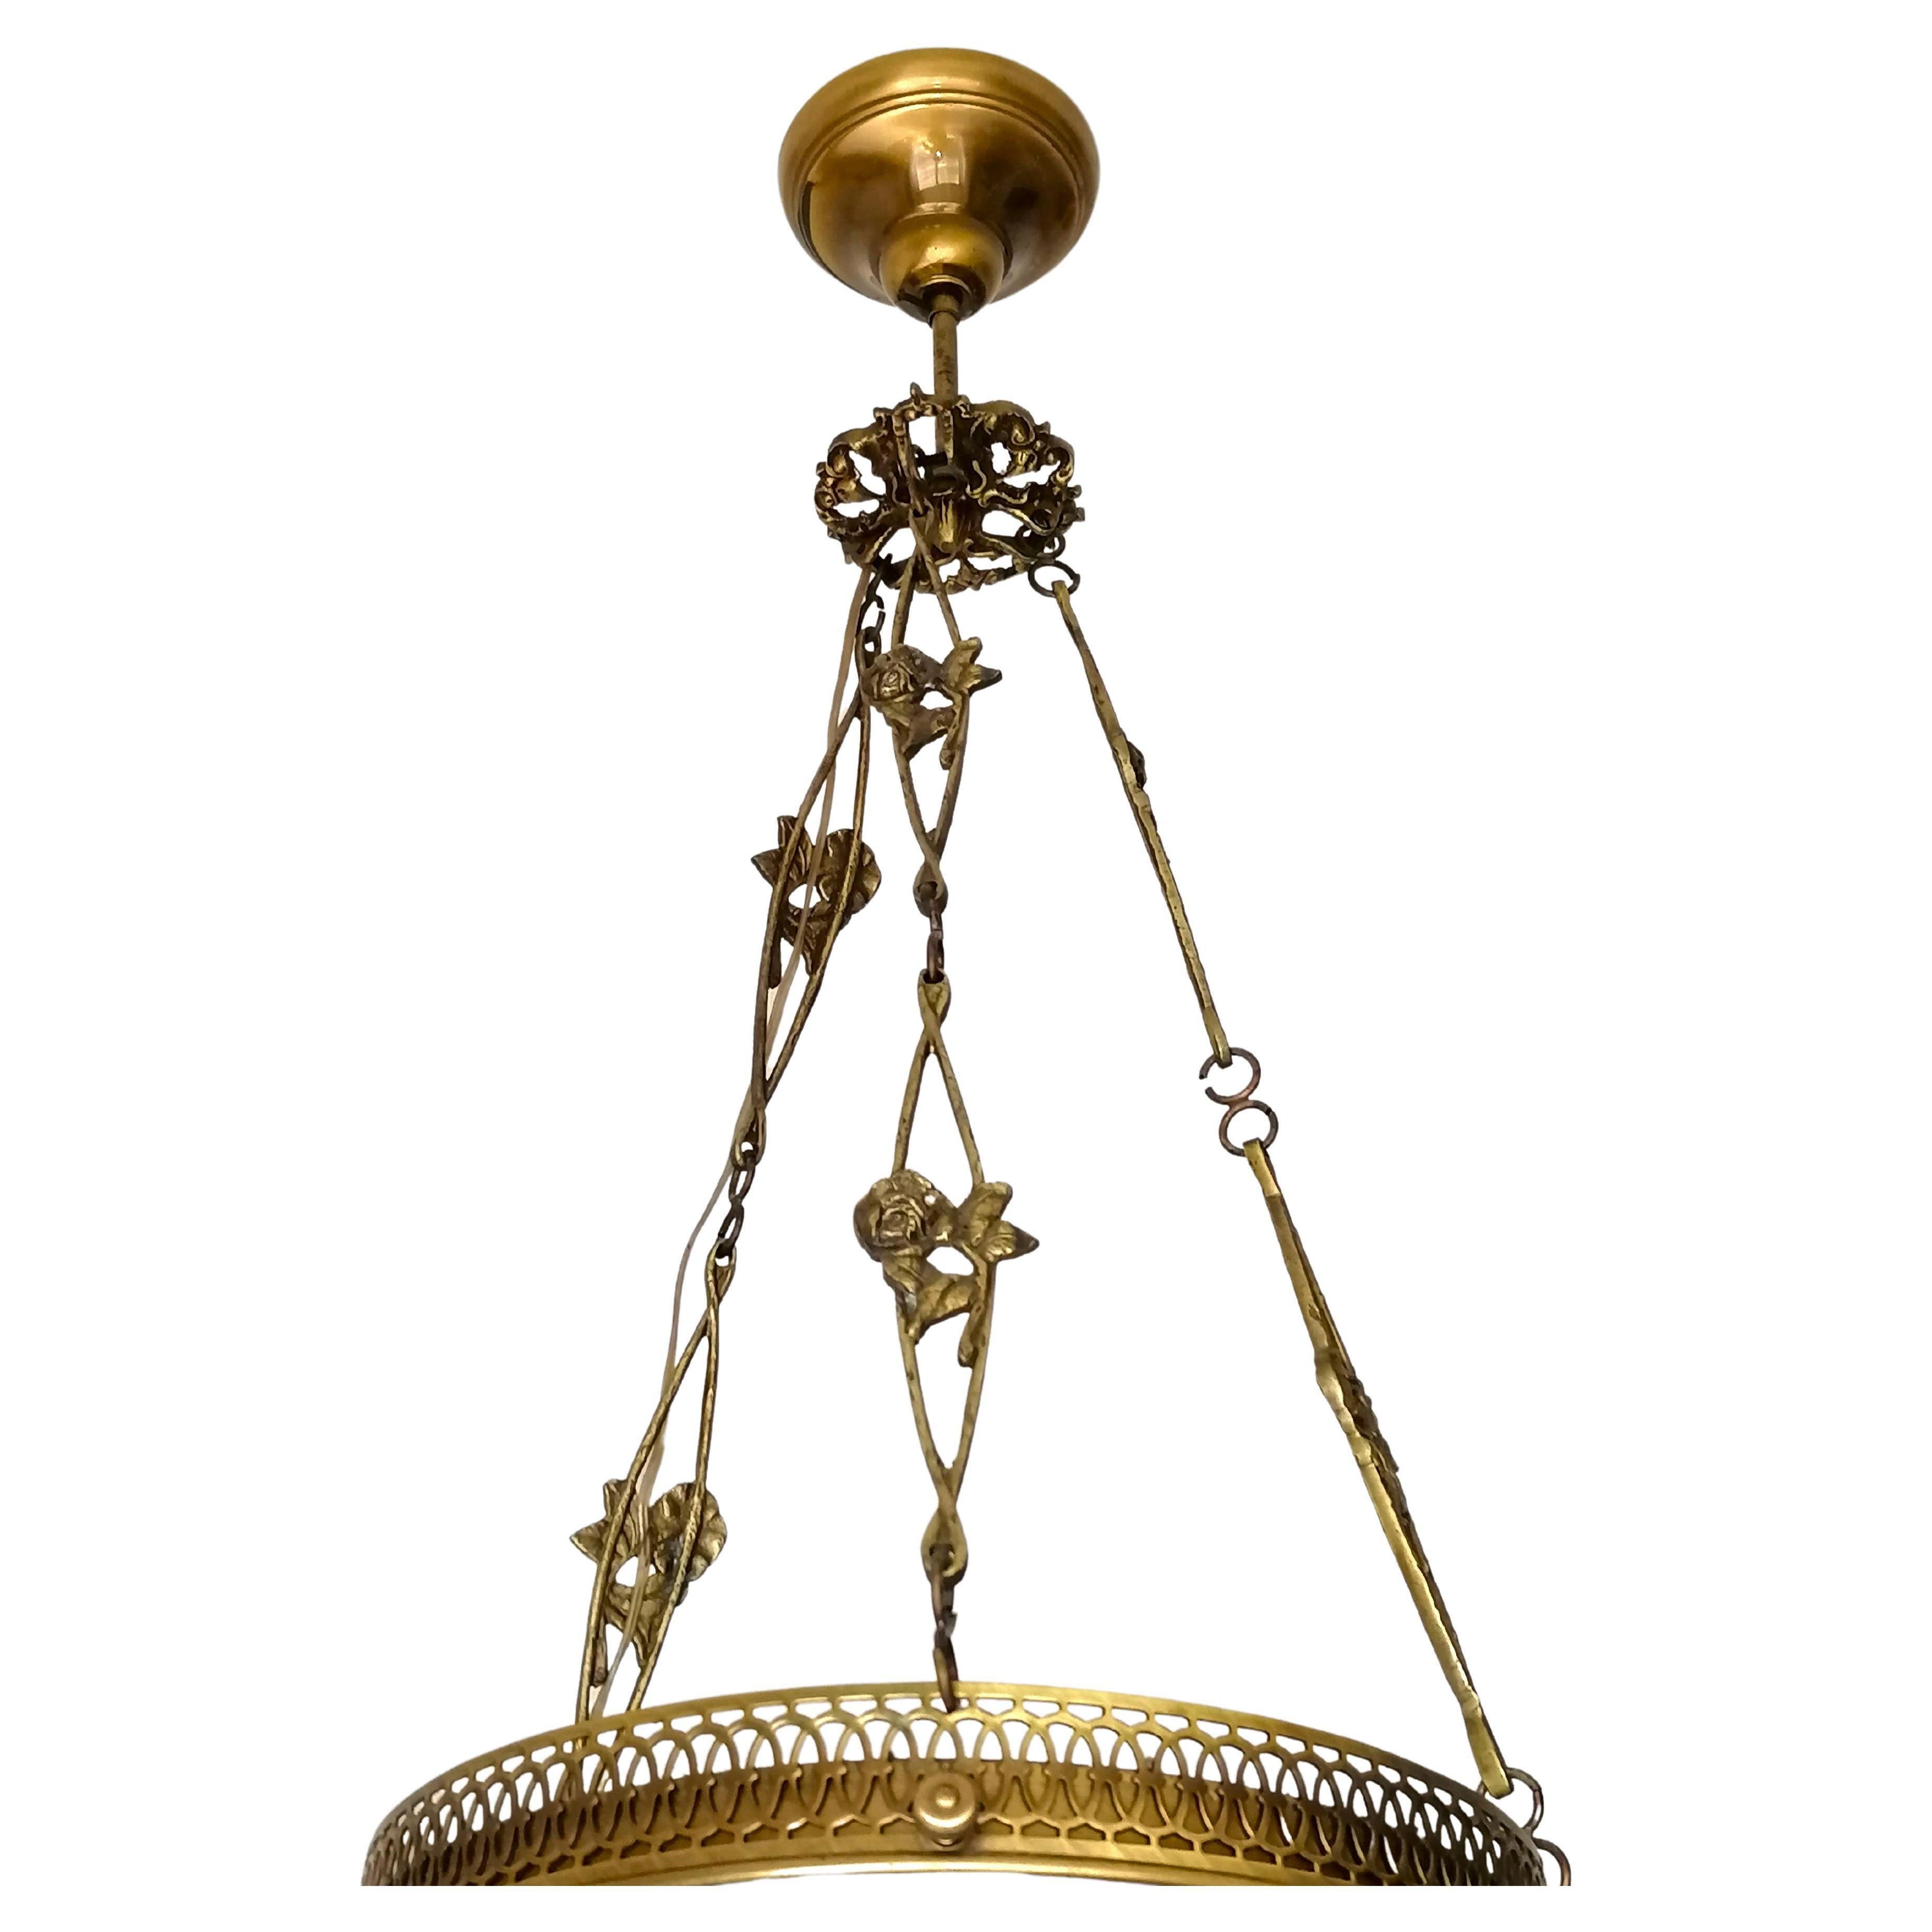 20th Century French Art Deco & Art Nouveau Chandelier in Frosted Glass & Gilt Bronze Ornament For Sale